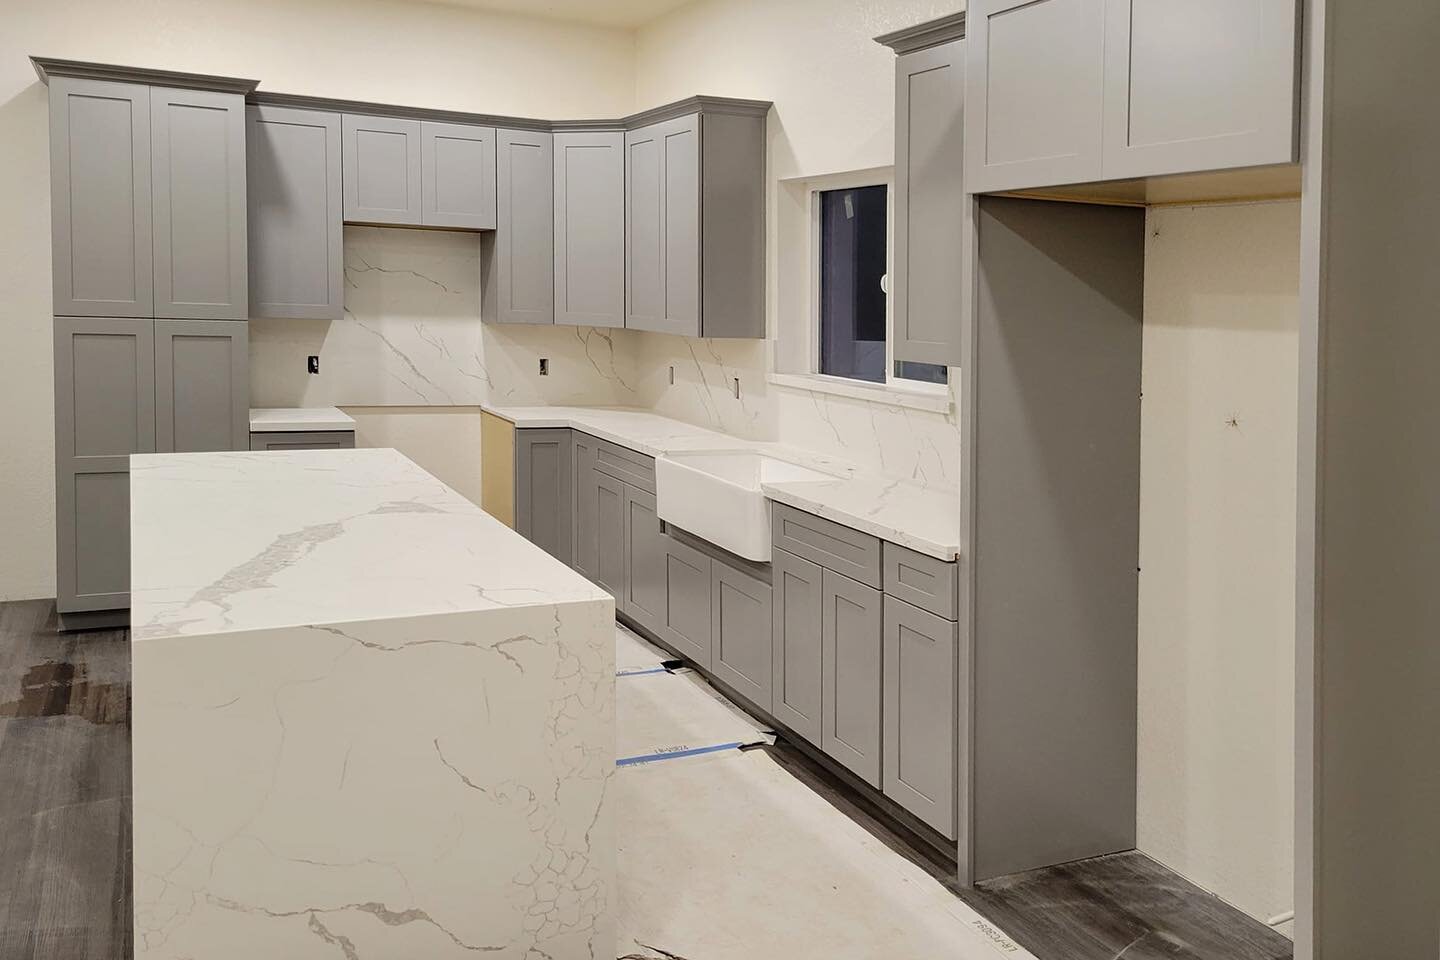 CABINET: Shaker Style in Light Grey Finish 
COUNTERTOP: Calacatta Gold
SINK: Farmhouse Sink 

Shaker Style also available in multiple finishes! 
____________

#intetiordesign #kitchendesign #showroom #kitchencabinets #shakercabinets #berensonhardware